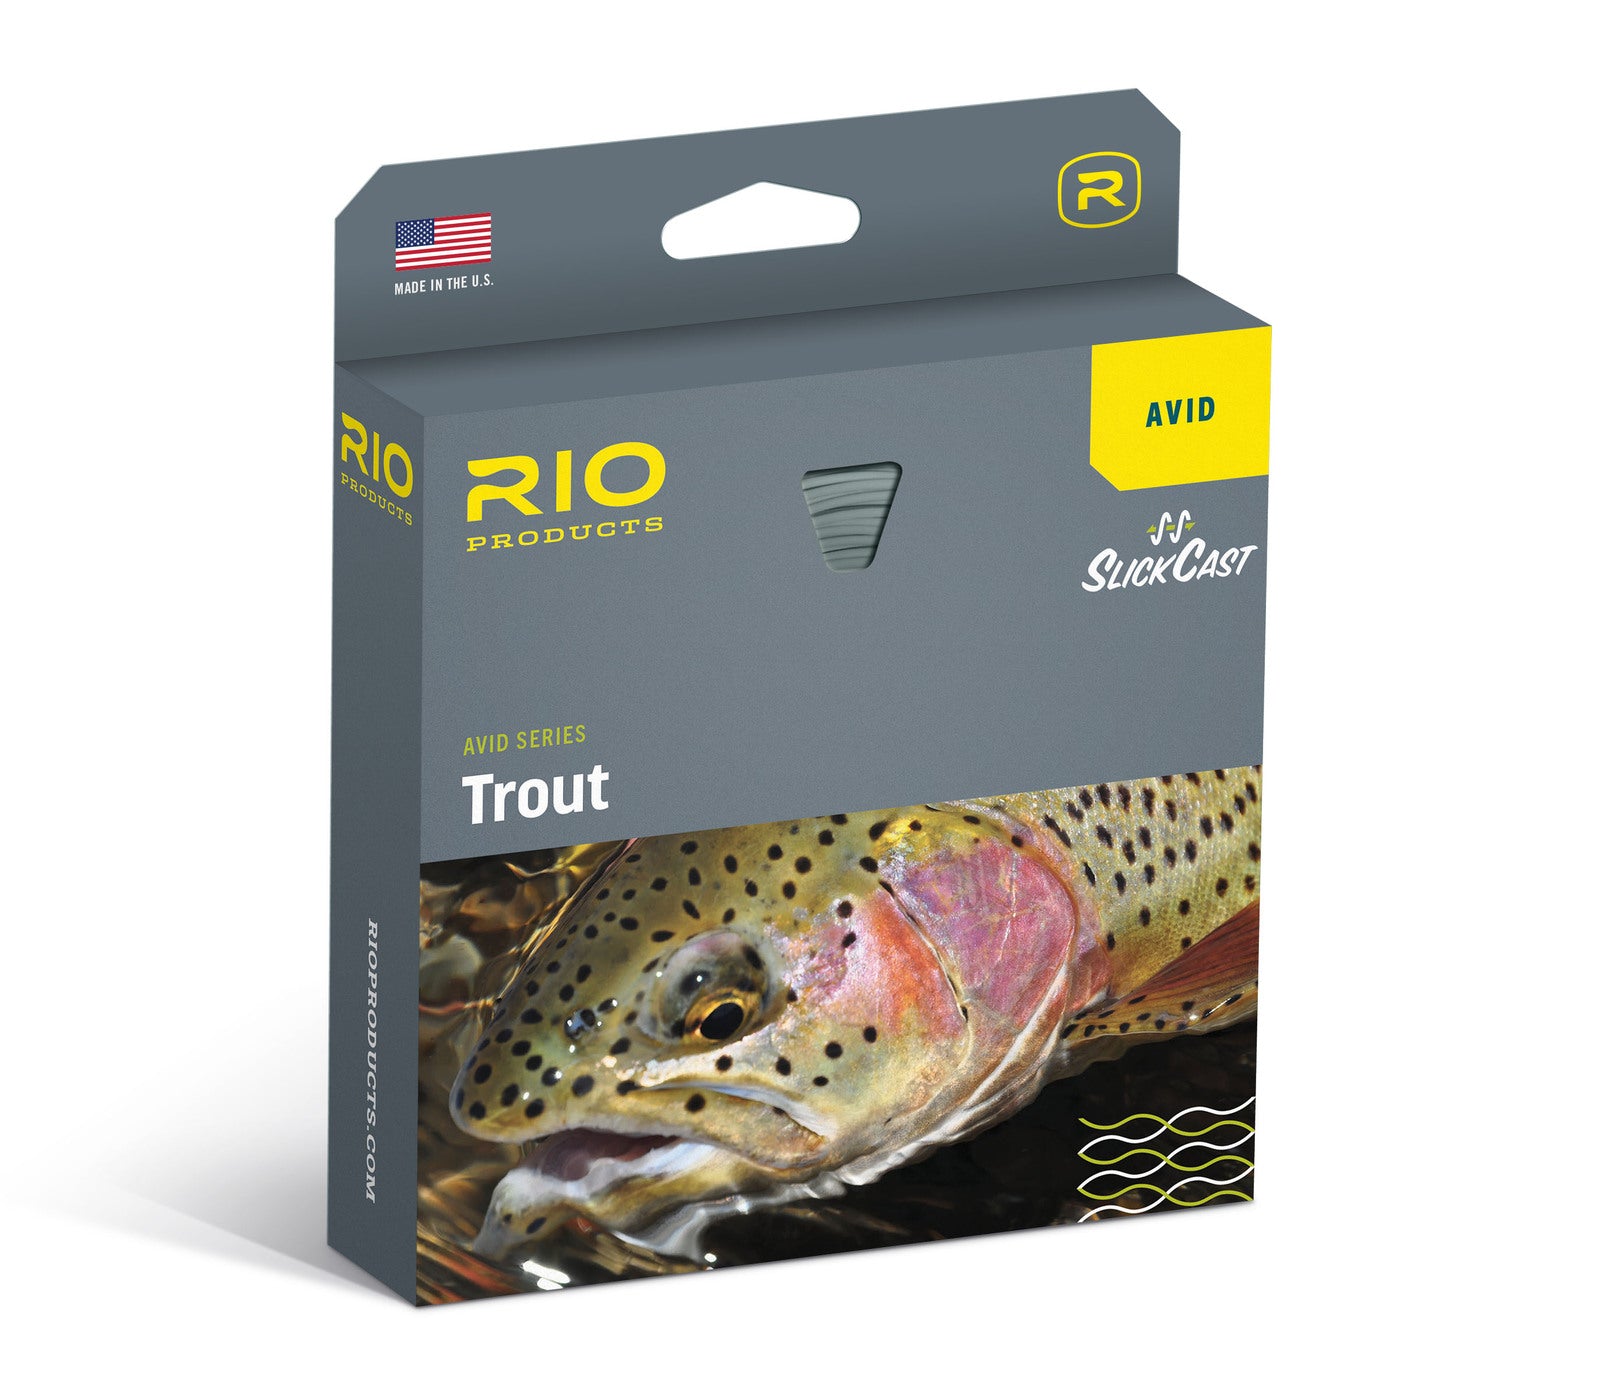 RIO Avid Gold Trout Fly Line - NEW!